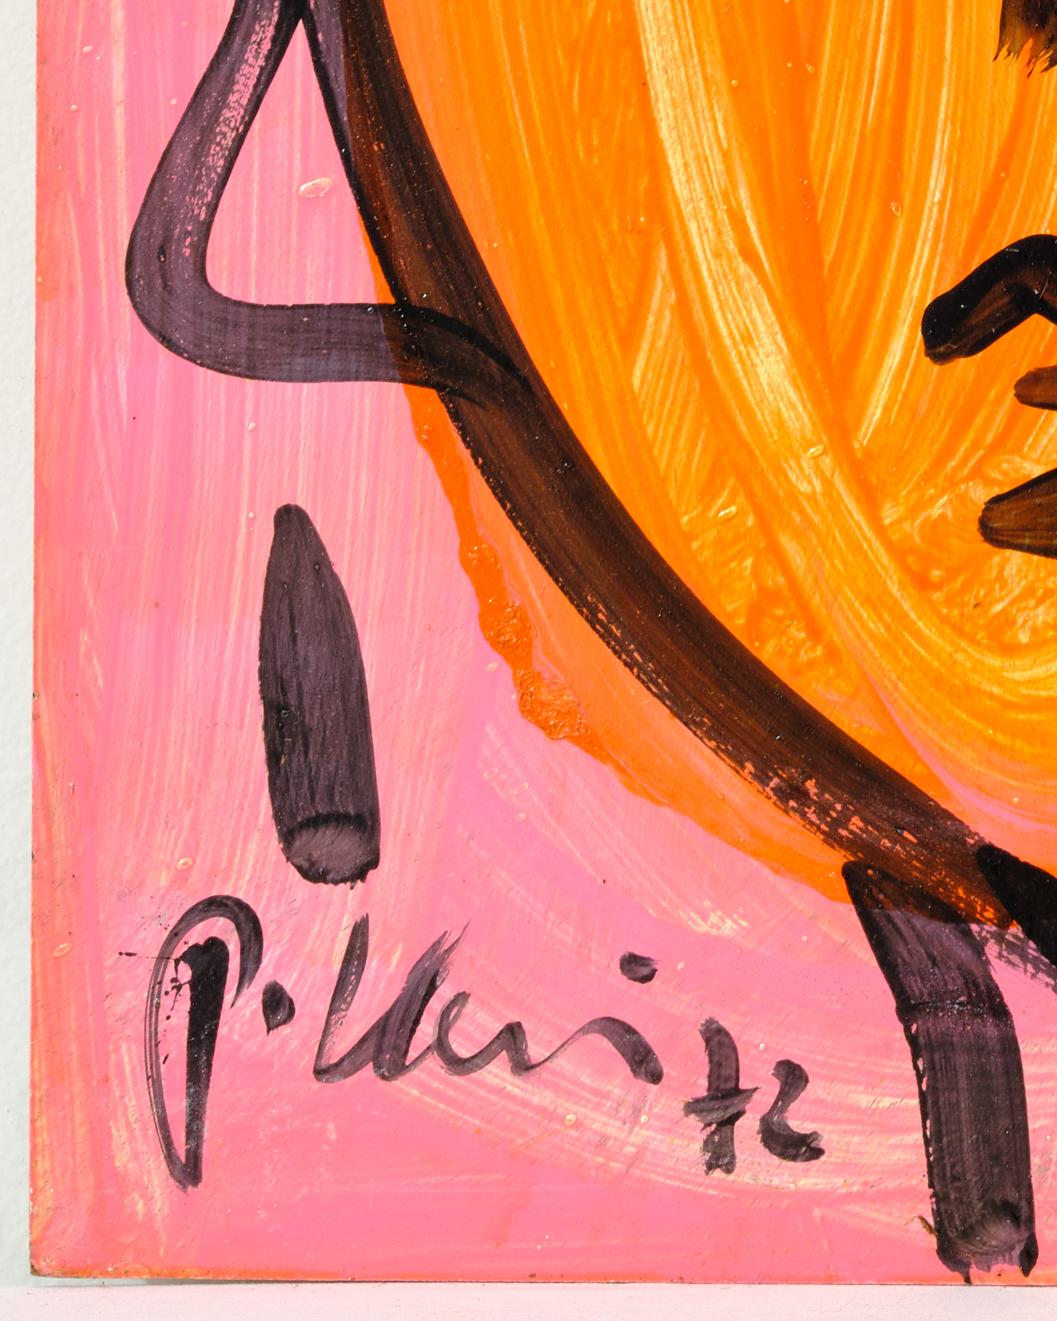 German Painting by Peter Keil, Pink and Orange Painted on Board, Modern Art, C 1972 For Sale